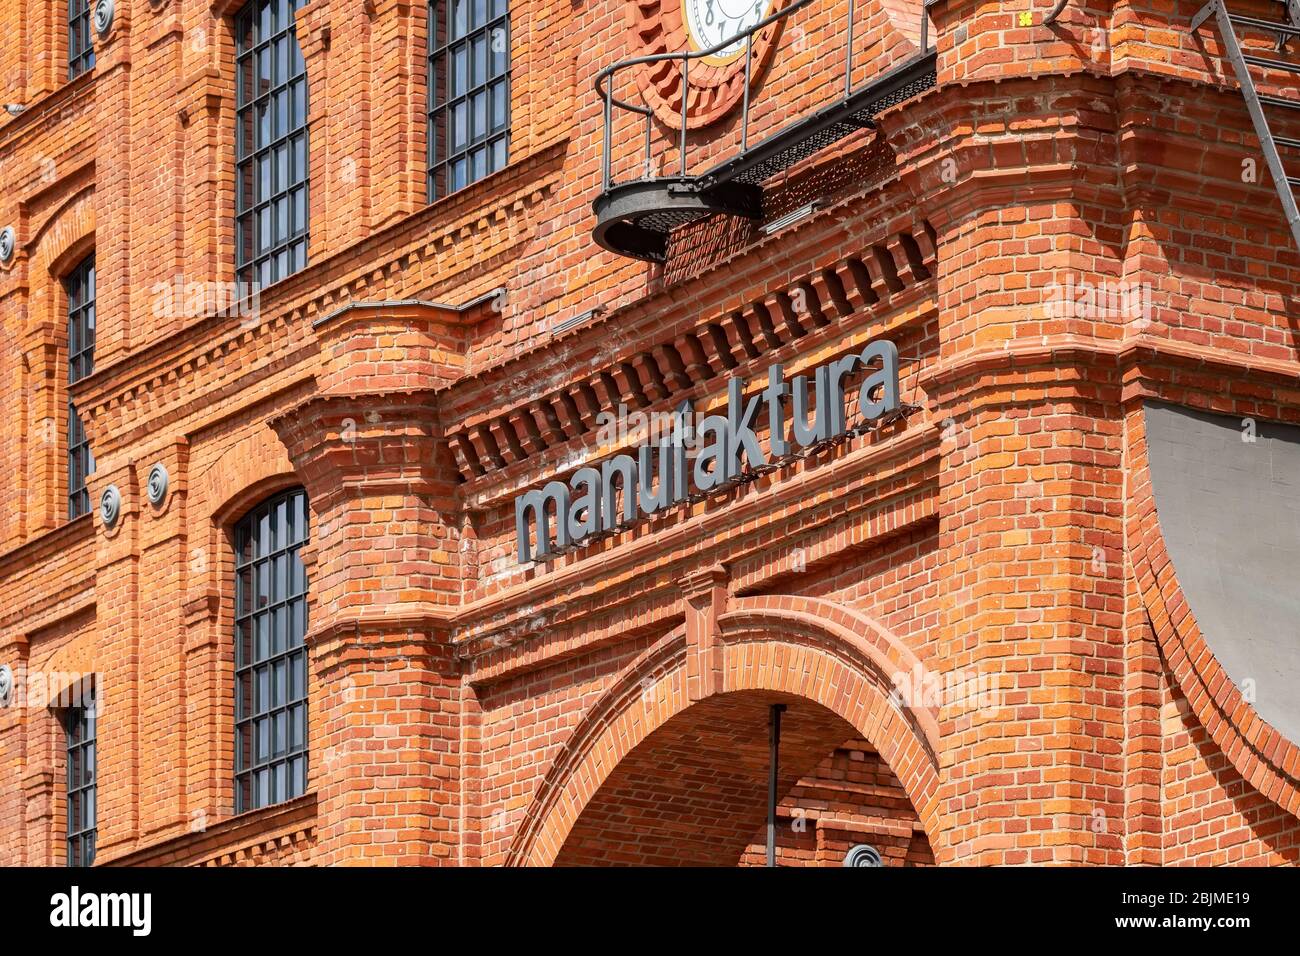 Lodz Poland Architecture High Resolution Stock Photography and Images -  Alamy